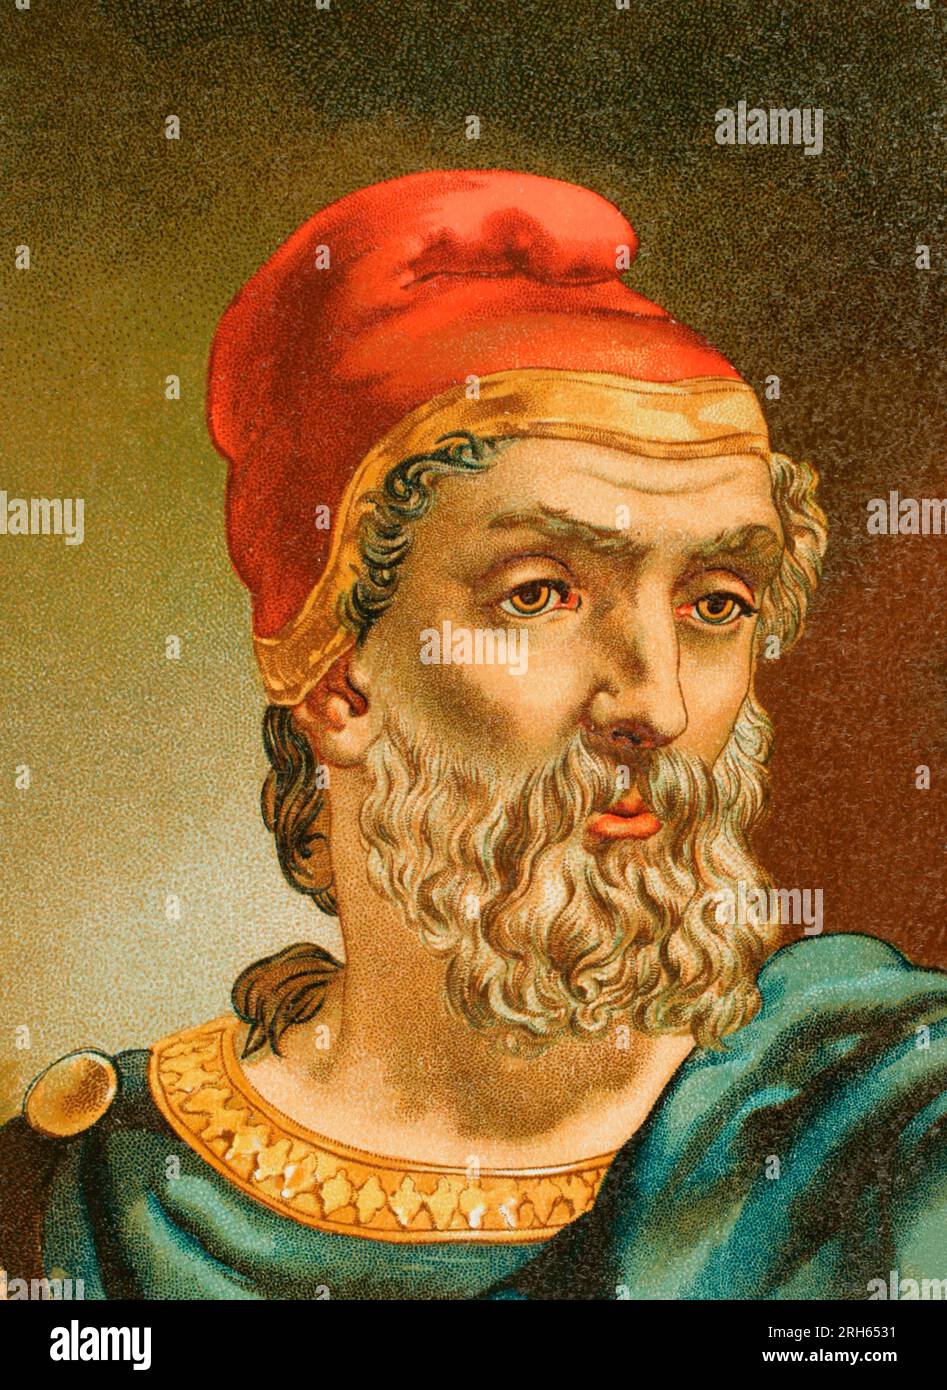 Archimedes (287 BC - 212 BC). Ancient Greek mathematician and inventor. Portrait. Chromolithography. Detail. 'Historia Universal' by Cesar Cantu. Volume III, 1882. Stock Photo